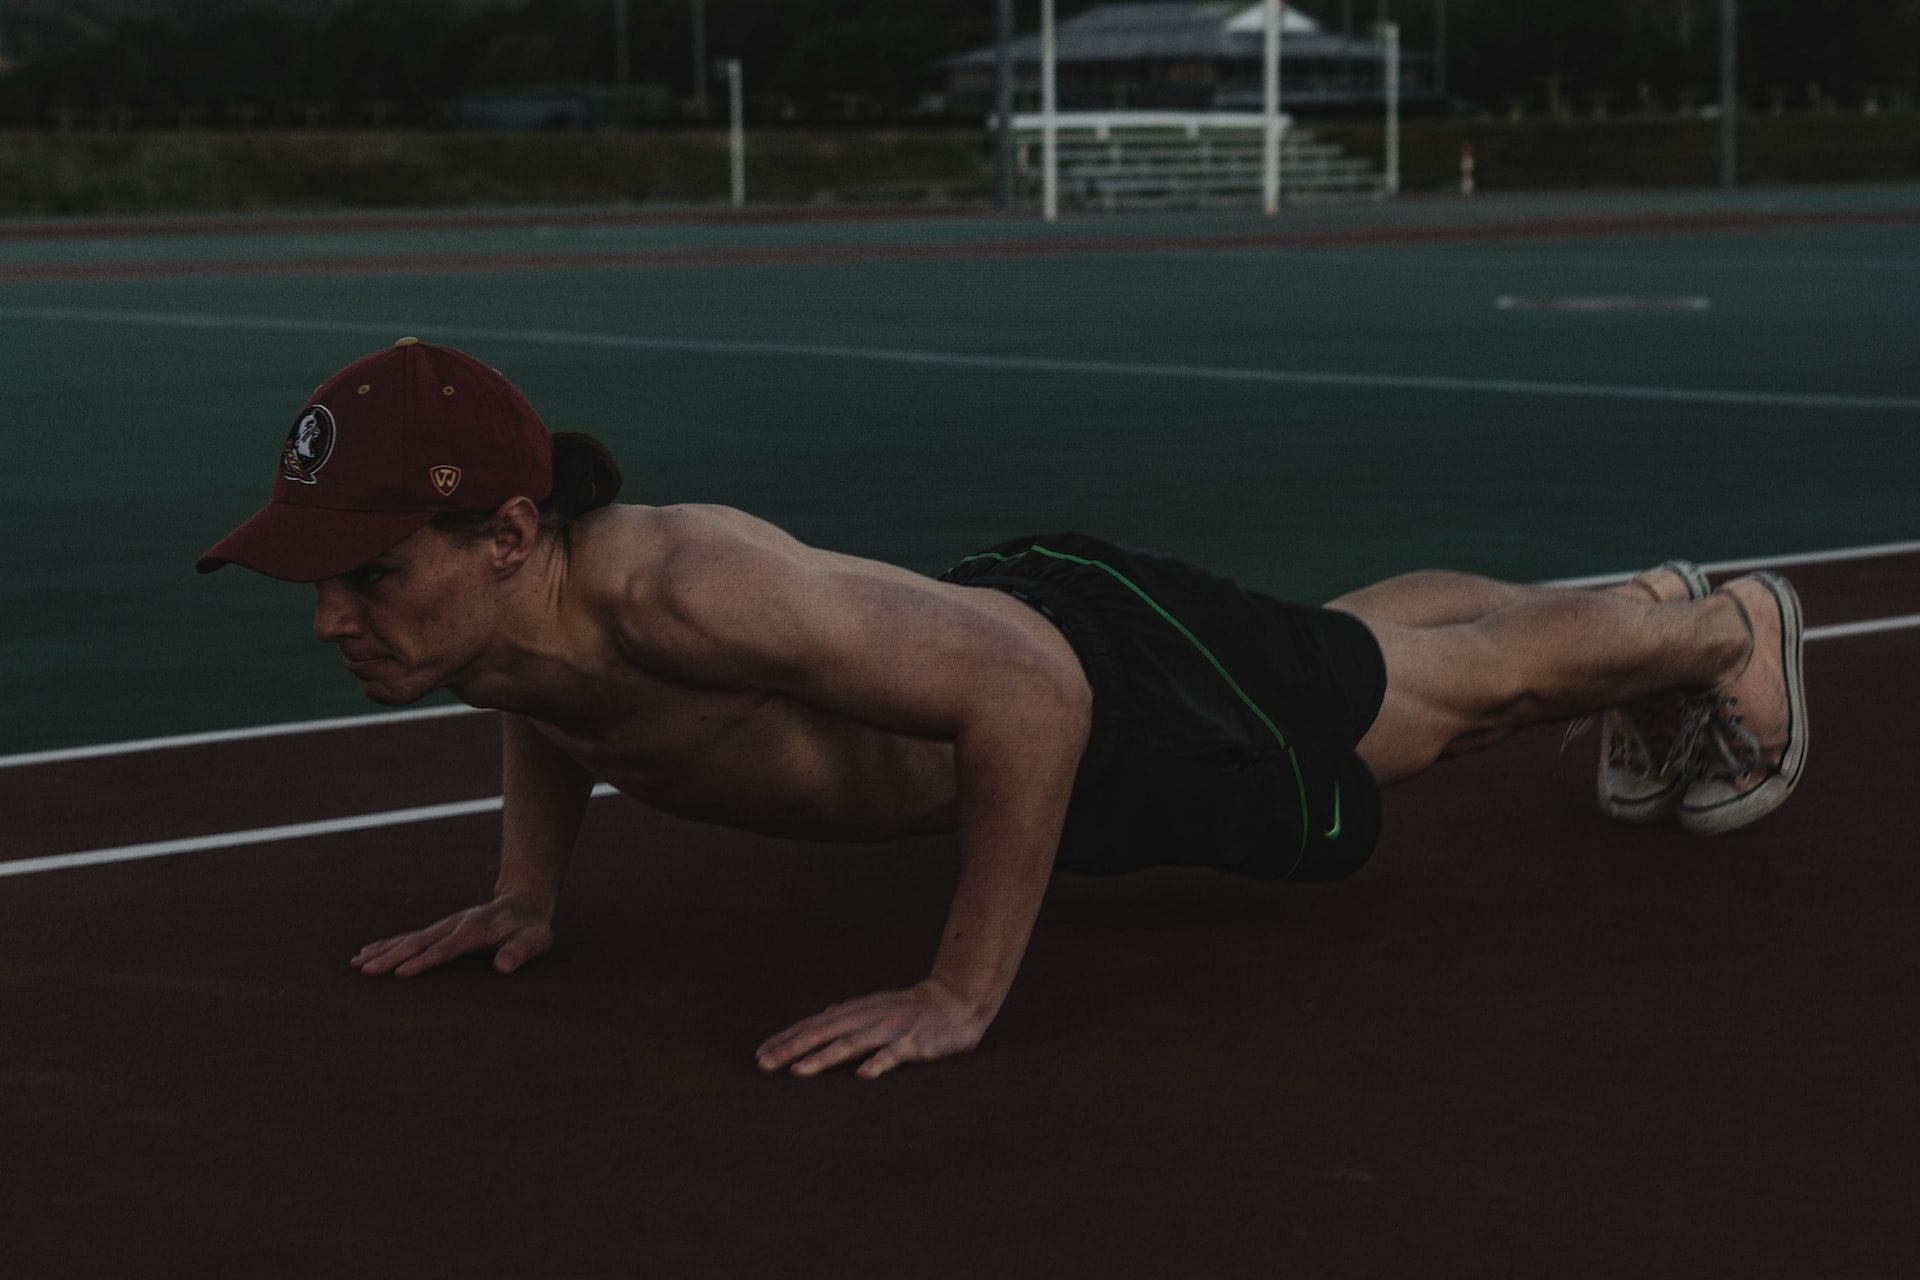 Learn the push-up position for maximum benefits. (Photo by James Barr on Unsplash)